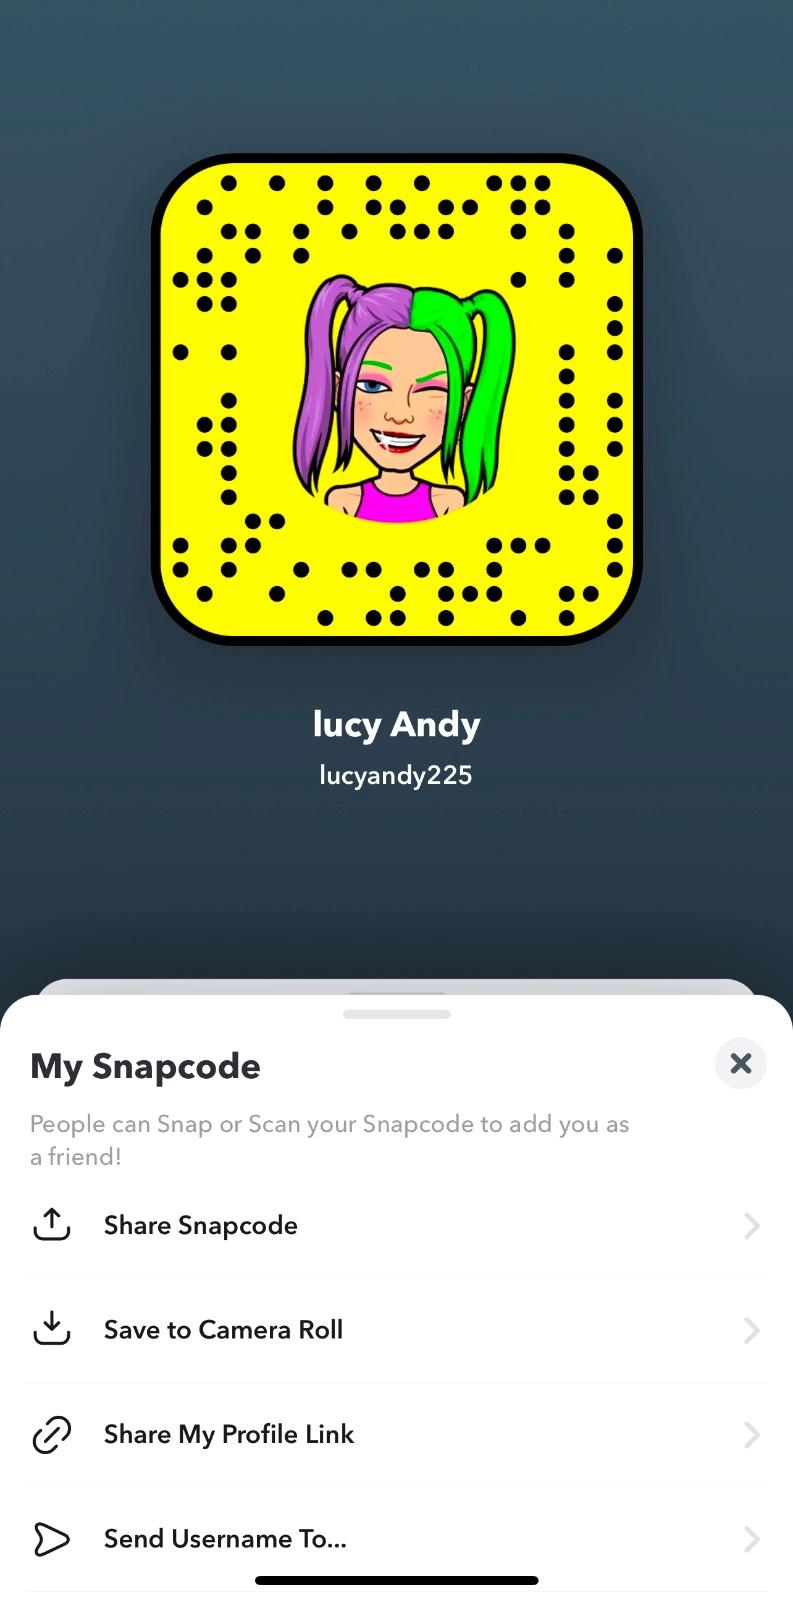 Let fuck Add me on Snapchat lucyandy225 To hookup I’m available 24/7🍑🍑